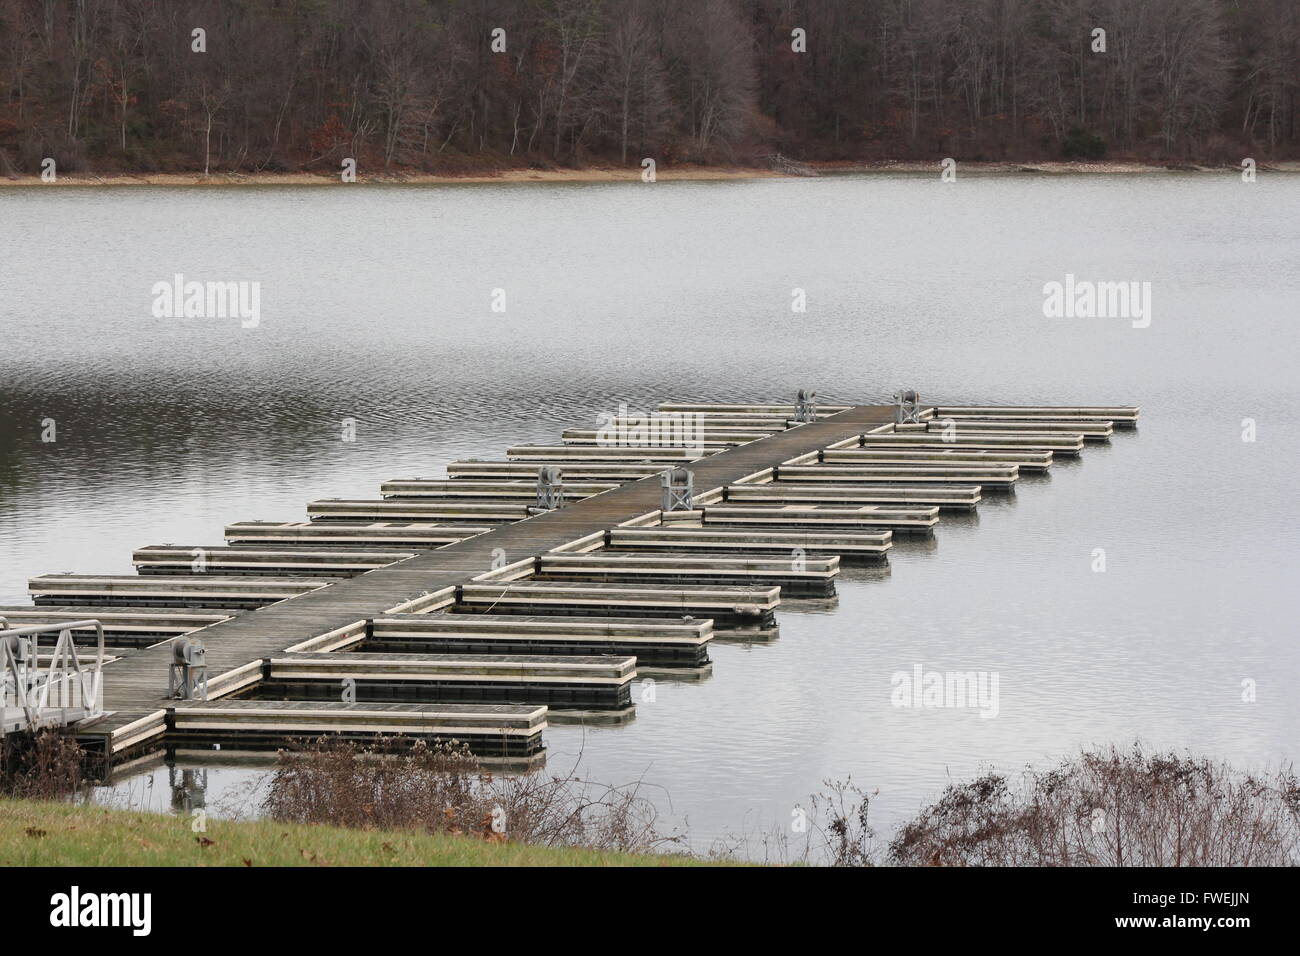 Empty boat slips during the early winter season in North America Stock Photo